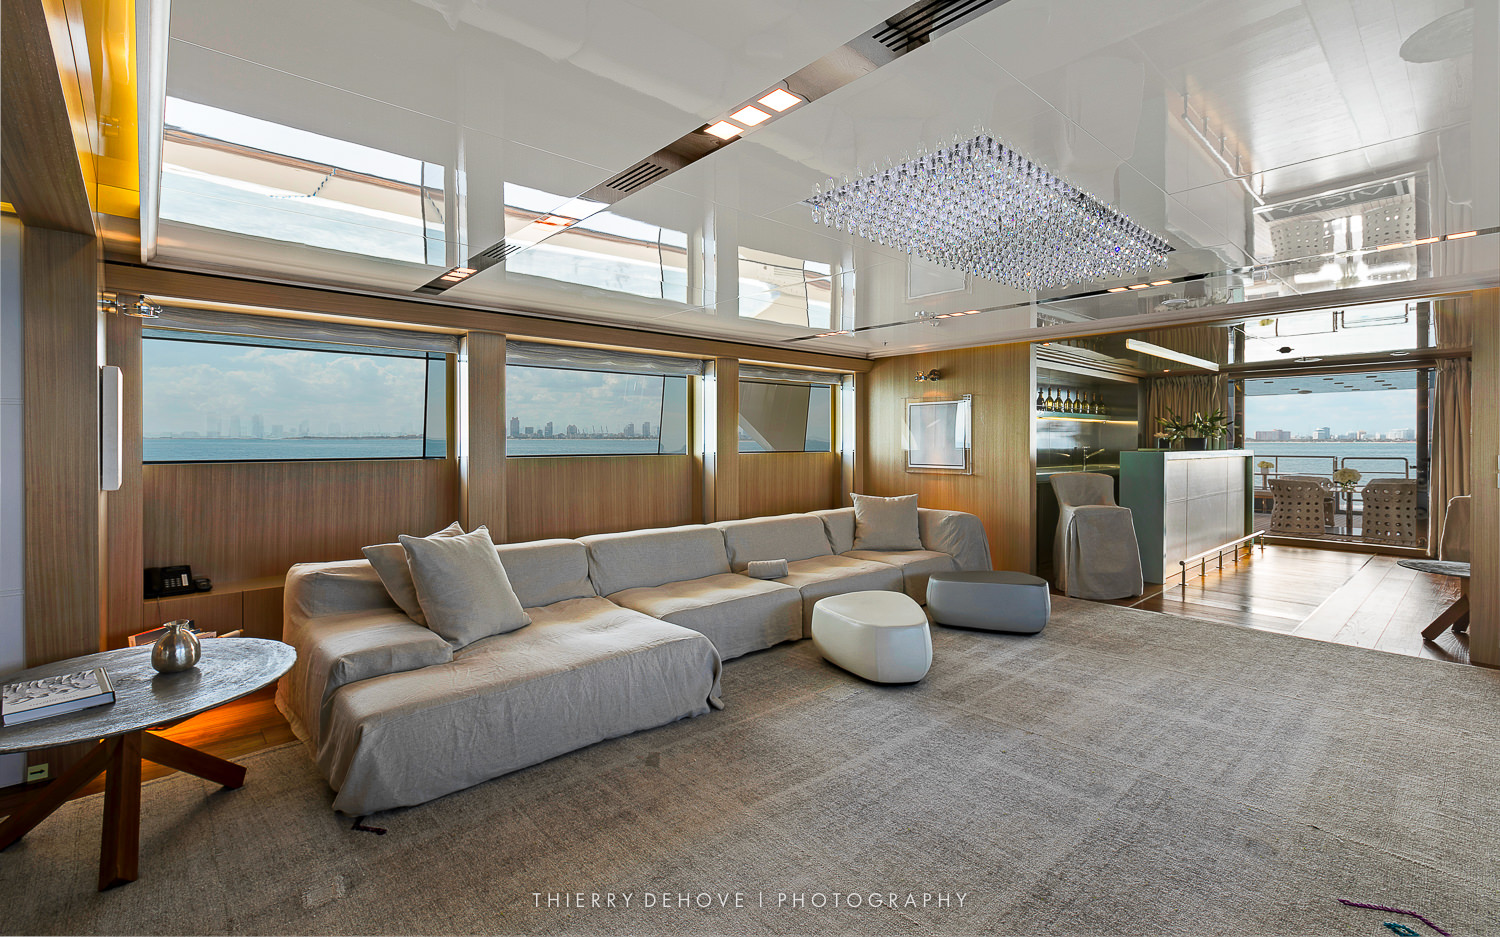 Main Saloon on Motor Yacht Vicky 194 by Baglietto, Italy